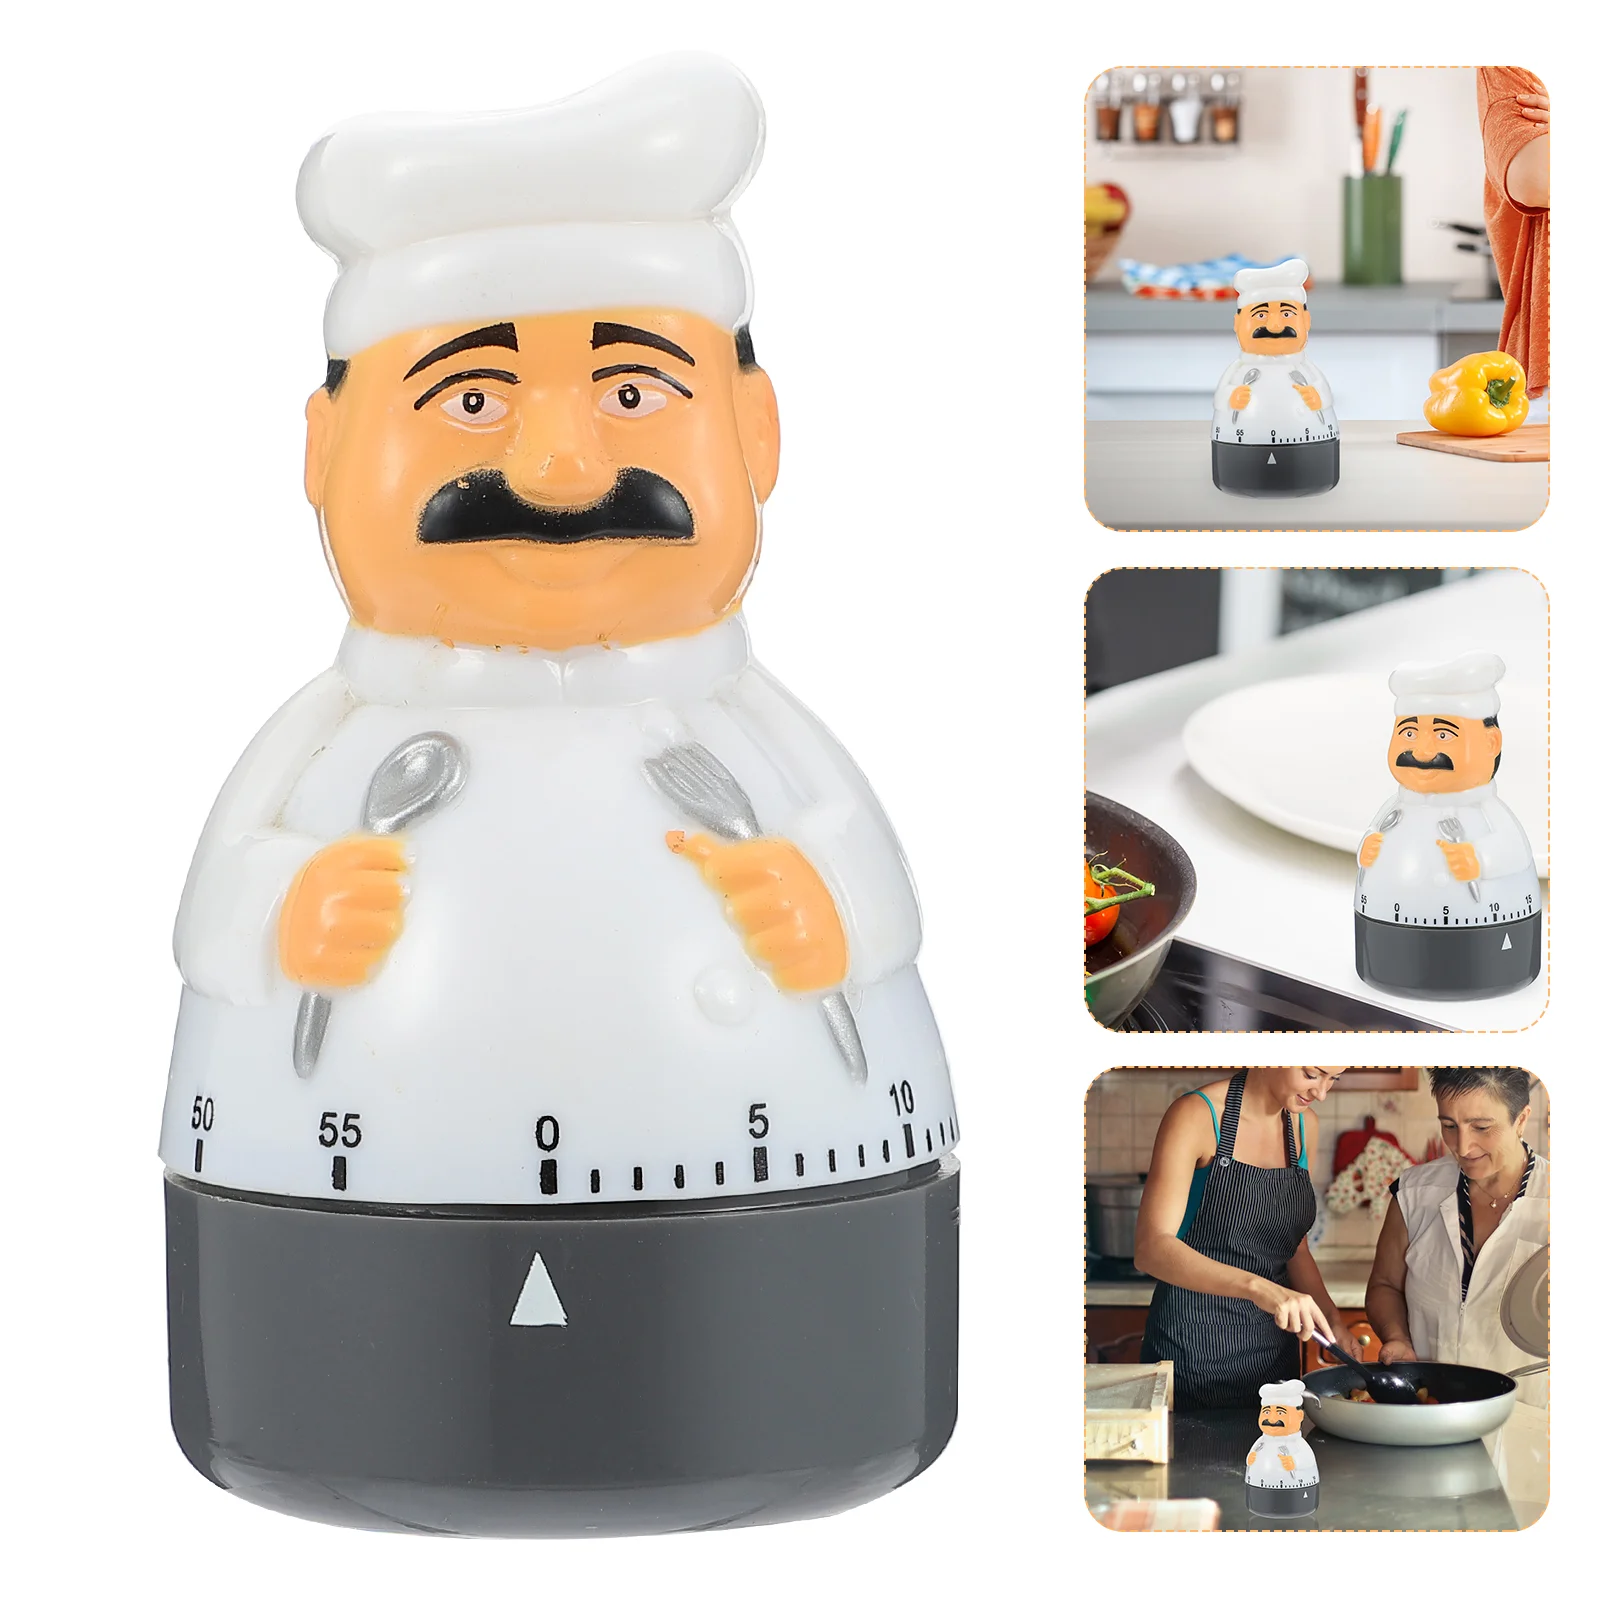 

Chef Timer Mechanical Reminder Cartoon Digital Clock Kitchen Cooking Manager Abs Oven Accessories